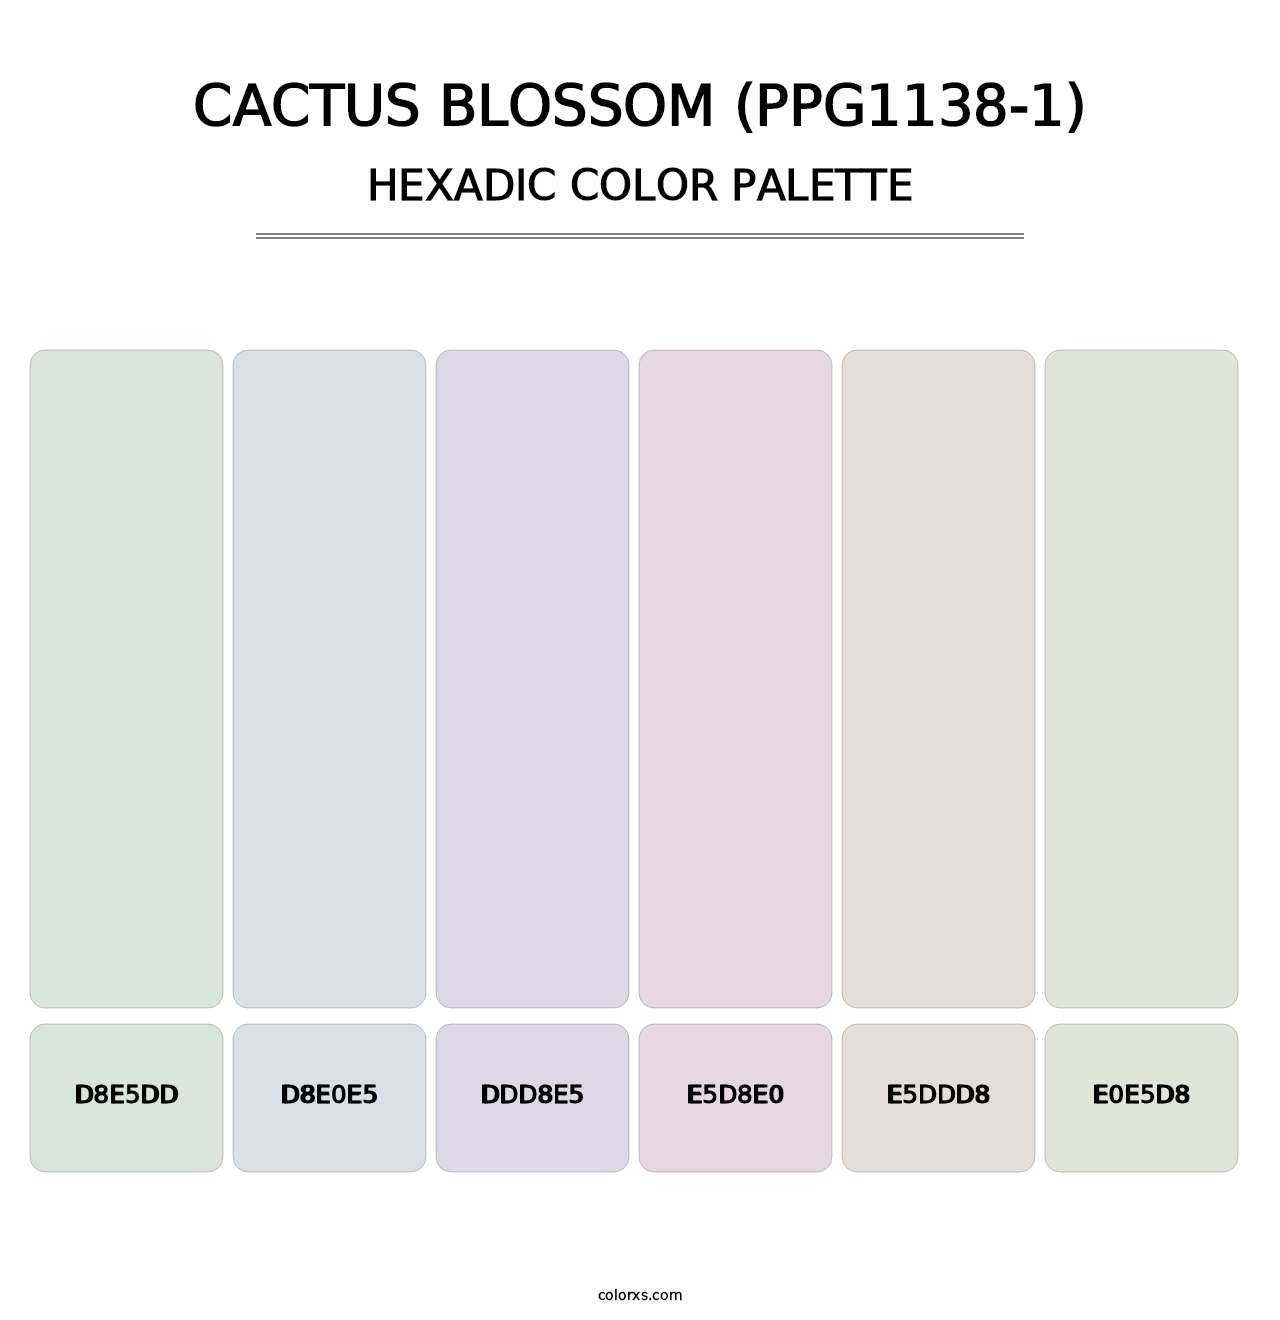 Cactus Blossom (PPG1138-1) - Hexadic Color Palette